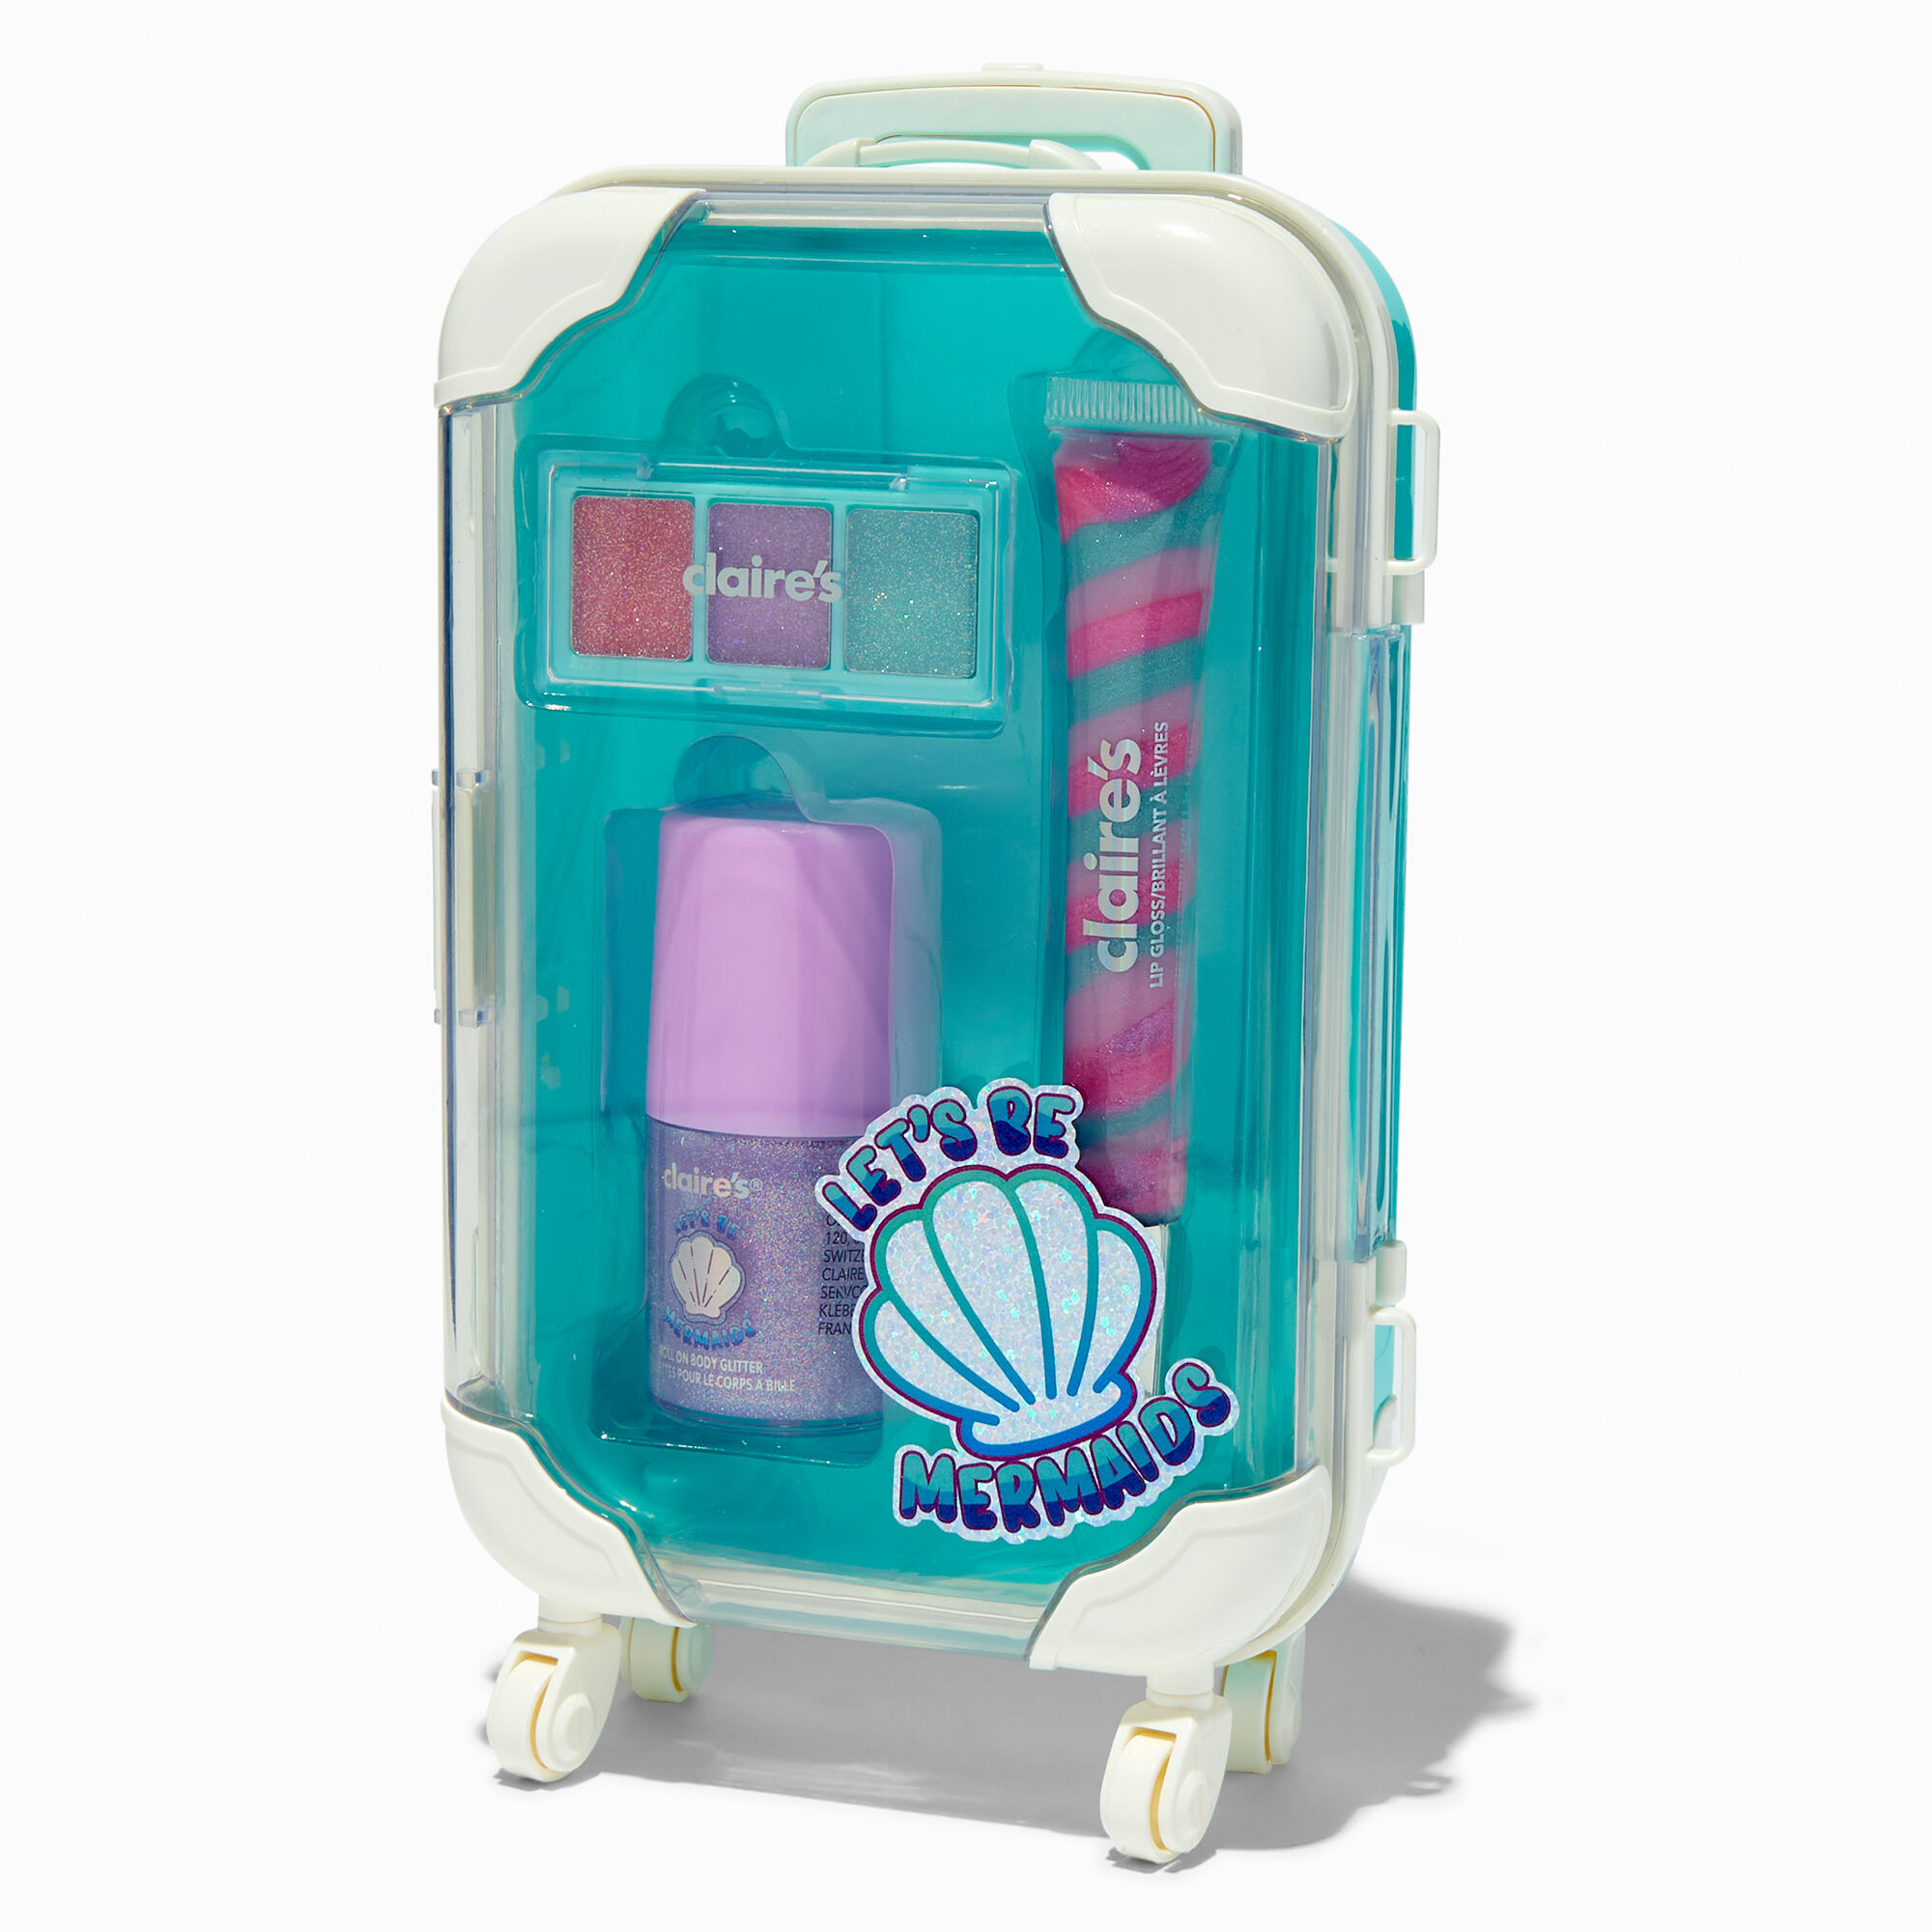 View Claires Mermaid Luggage Body Art Makeup Set information